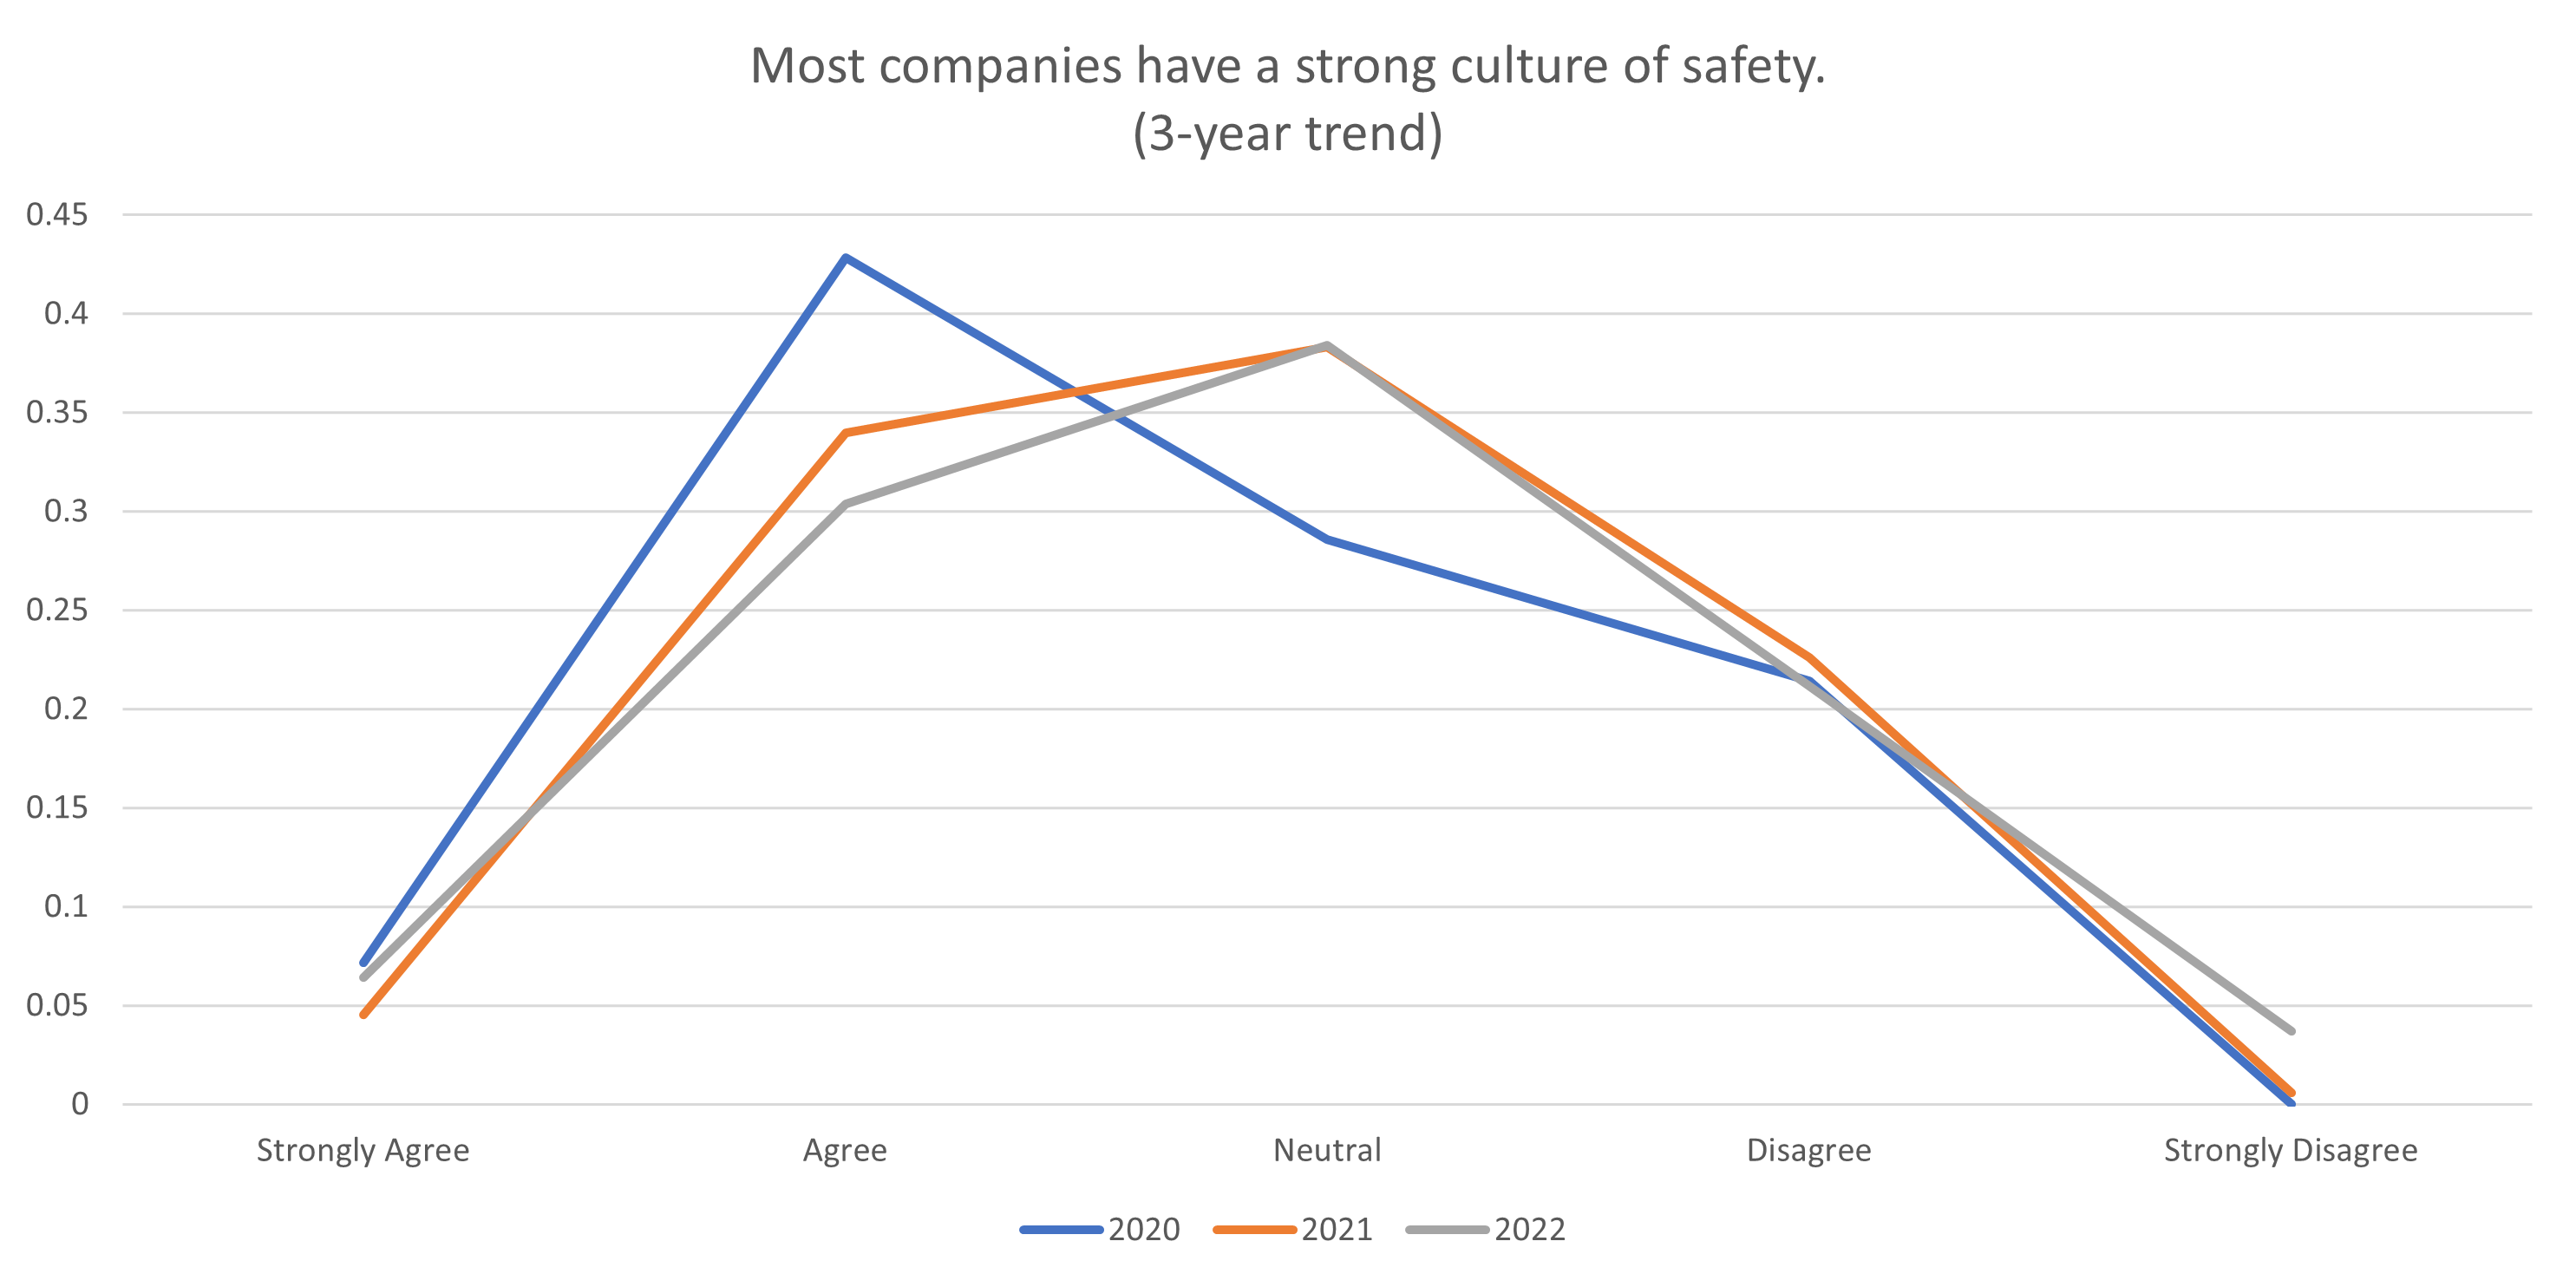 Most companies have a strong culture of safety